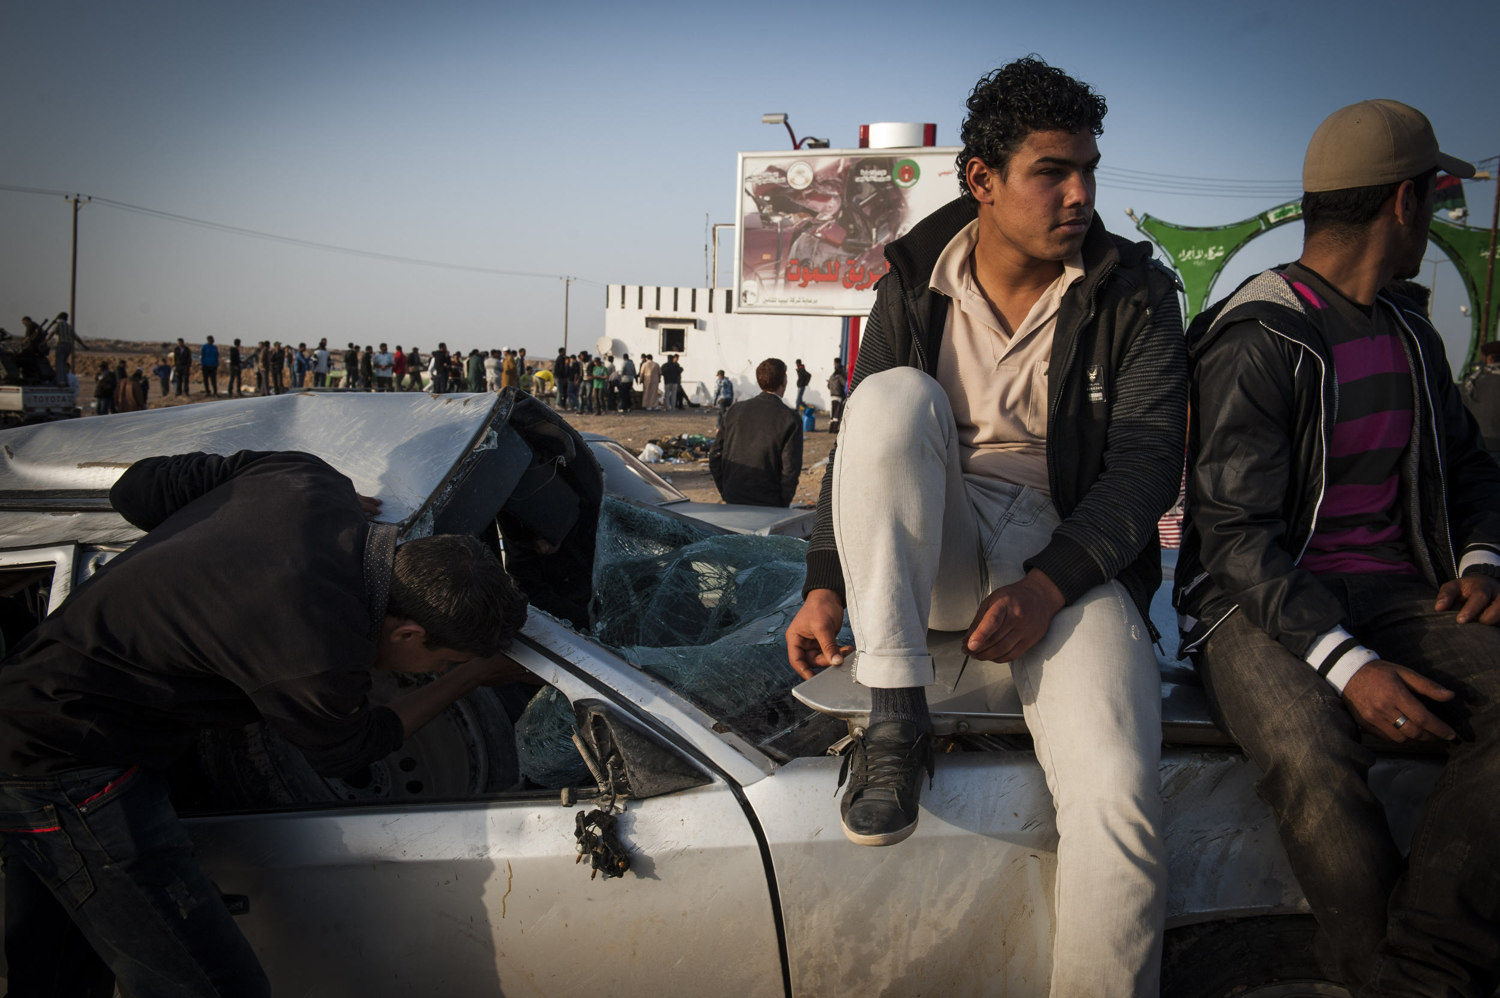  Boys sit on a broken car outside of the check point in Brega, Libya. Rebel troops are largely made out of Volunteers lack knowledge of military movement or weaponry.&nbsp; 